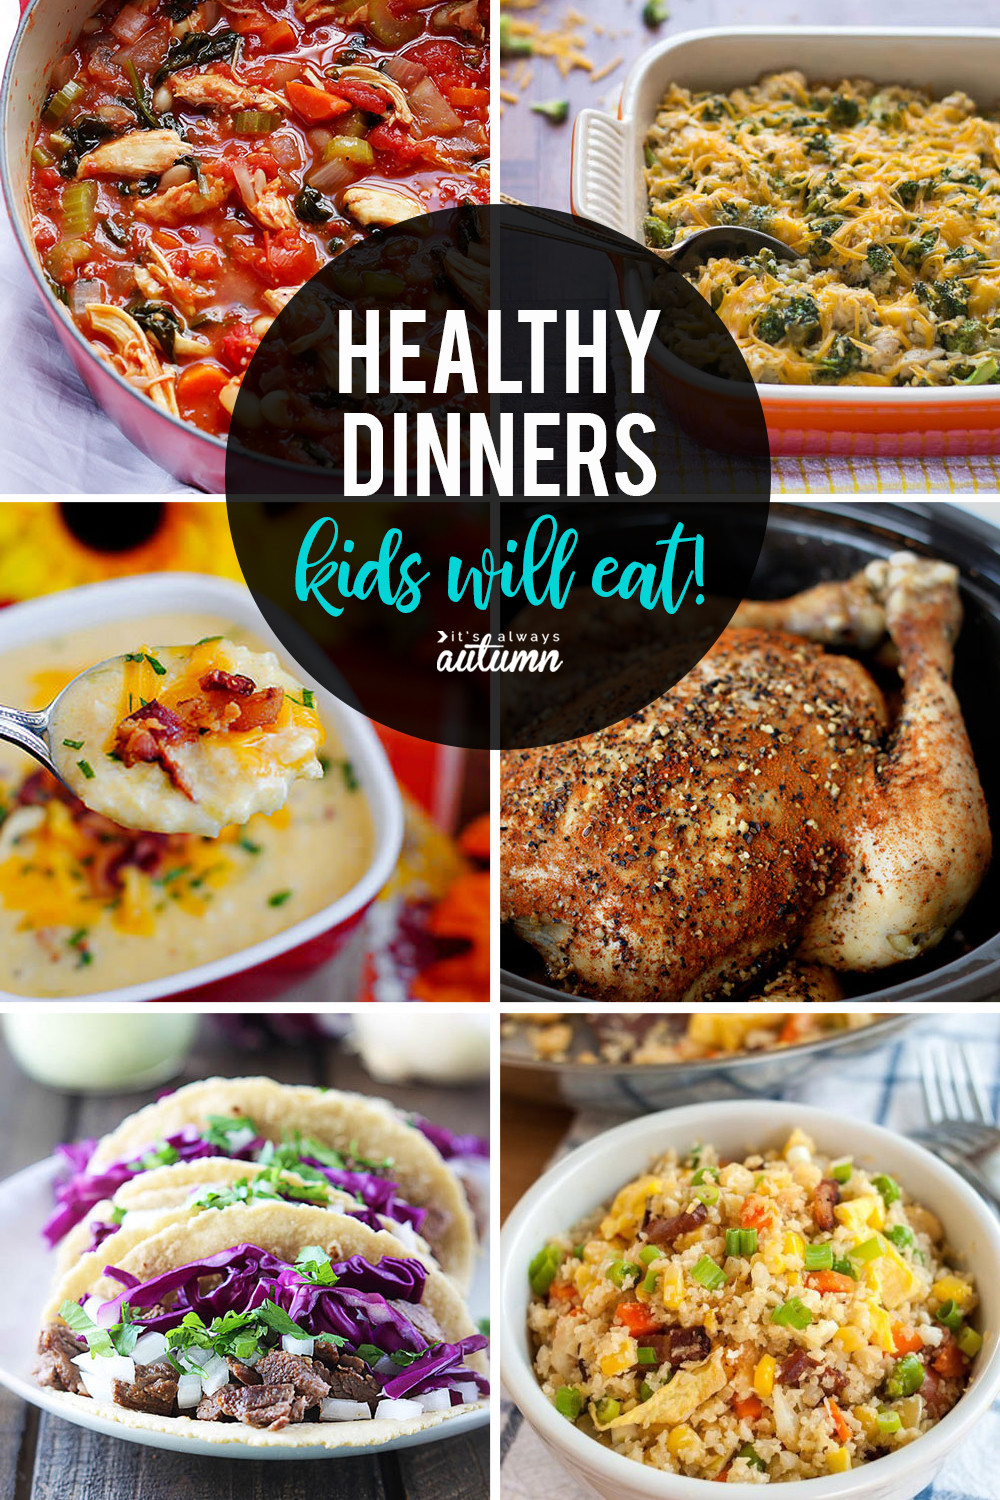 Healthy Dinner For Kids
 20 healthy easy recipes your kids will actually want to